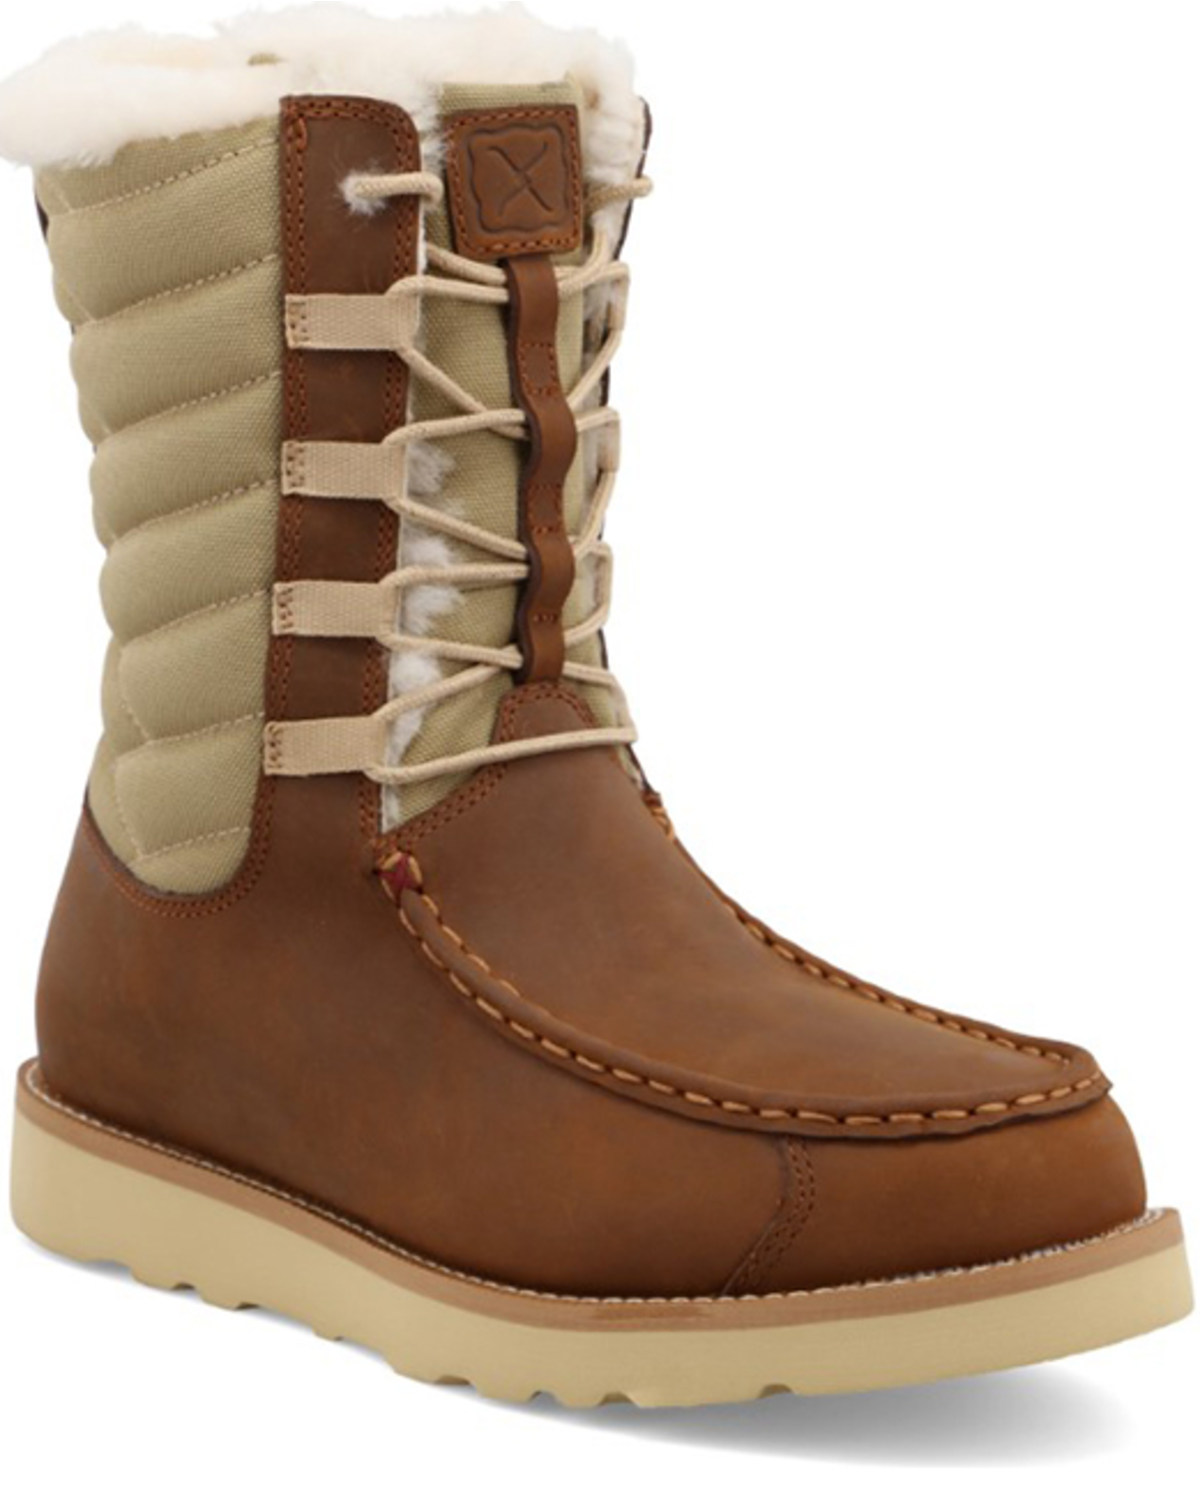 Twisted X Women's Oiled Saddle Lace-Up Shearling Lined Wedge Sole Boots - Moc Toe